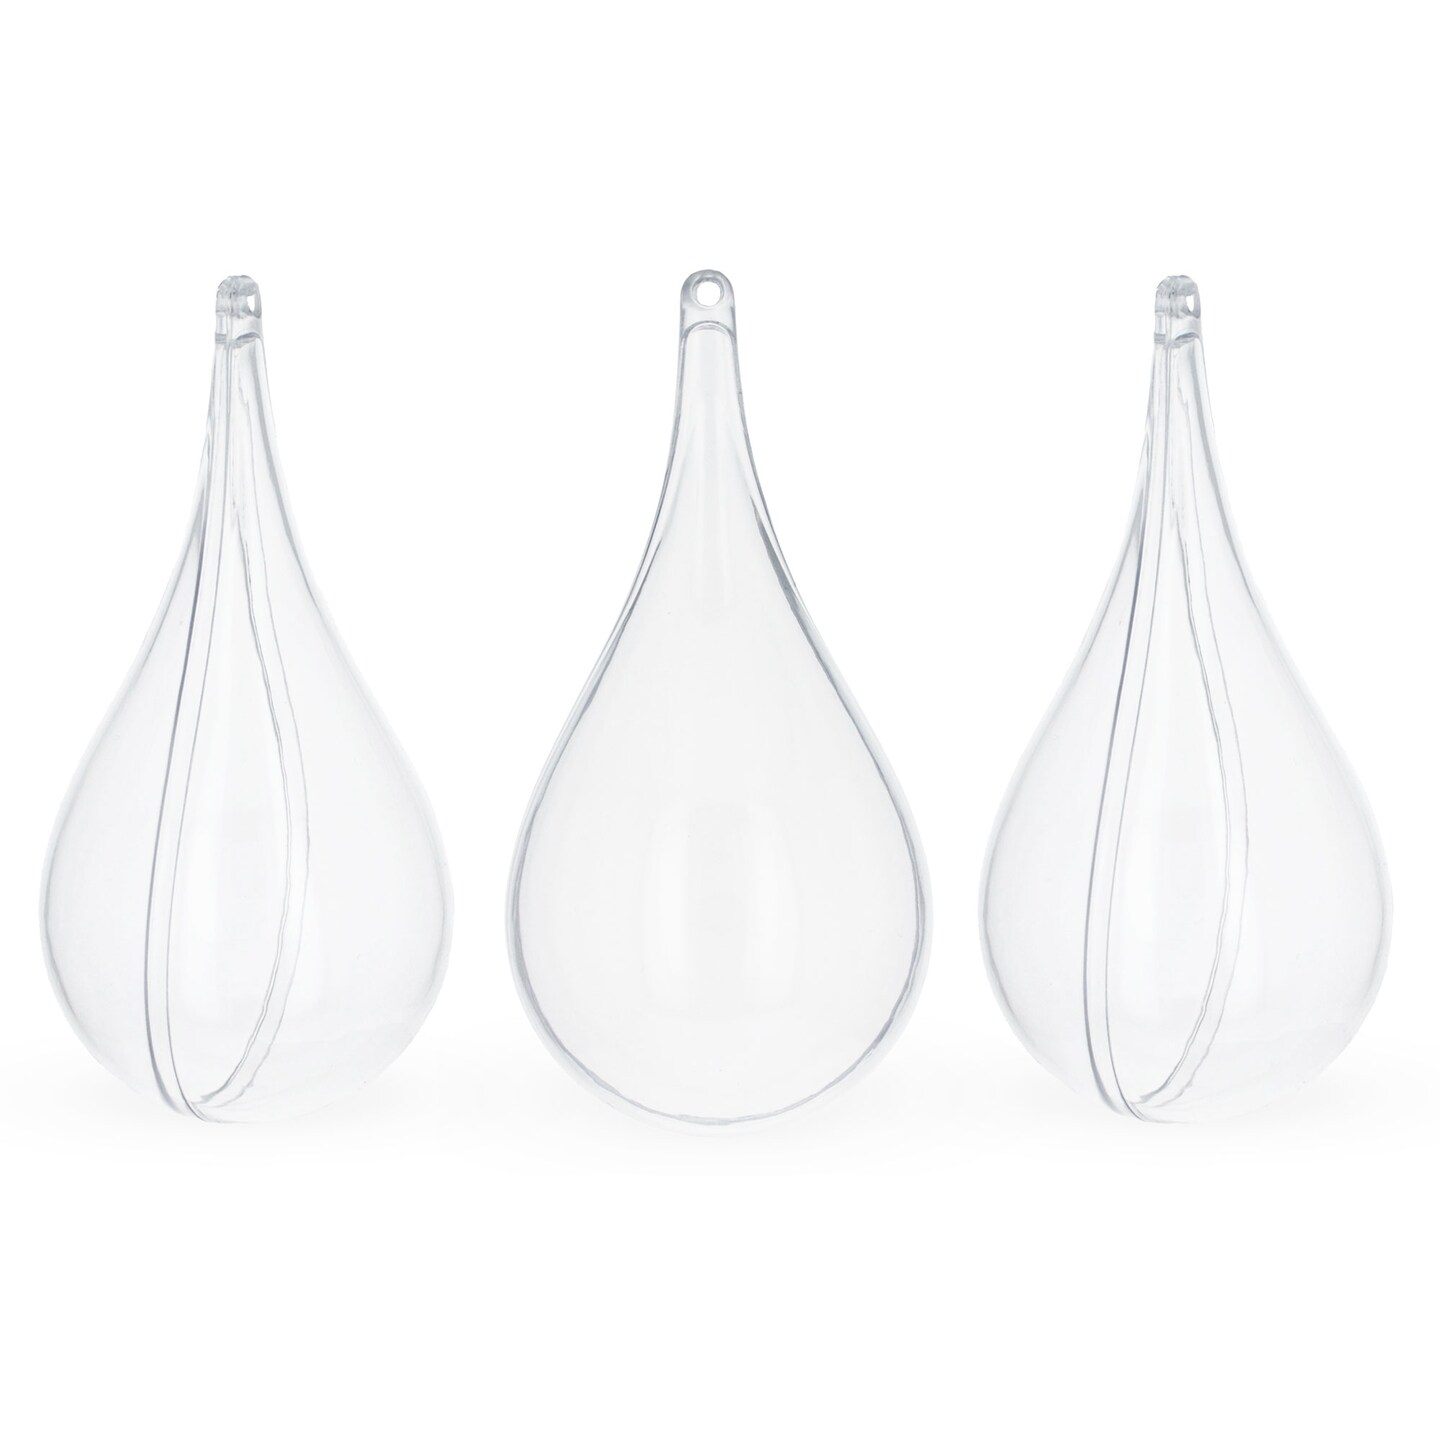 Set of 3 Clear Plastic Waterdrop Ornaments 4.3 Inches (109 mm)